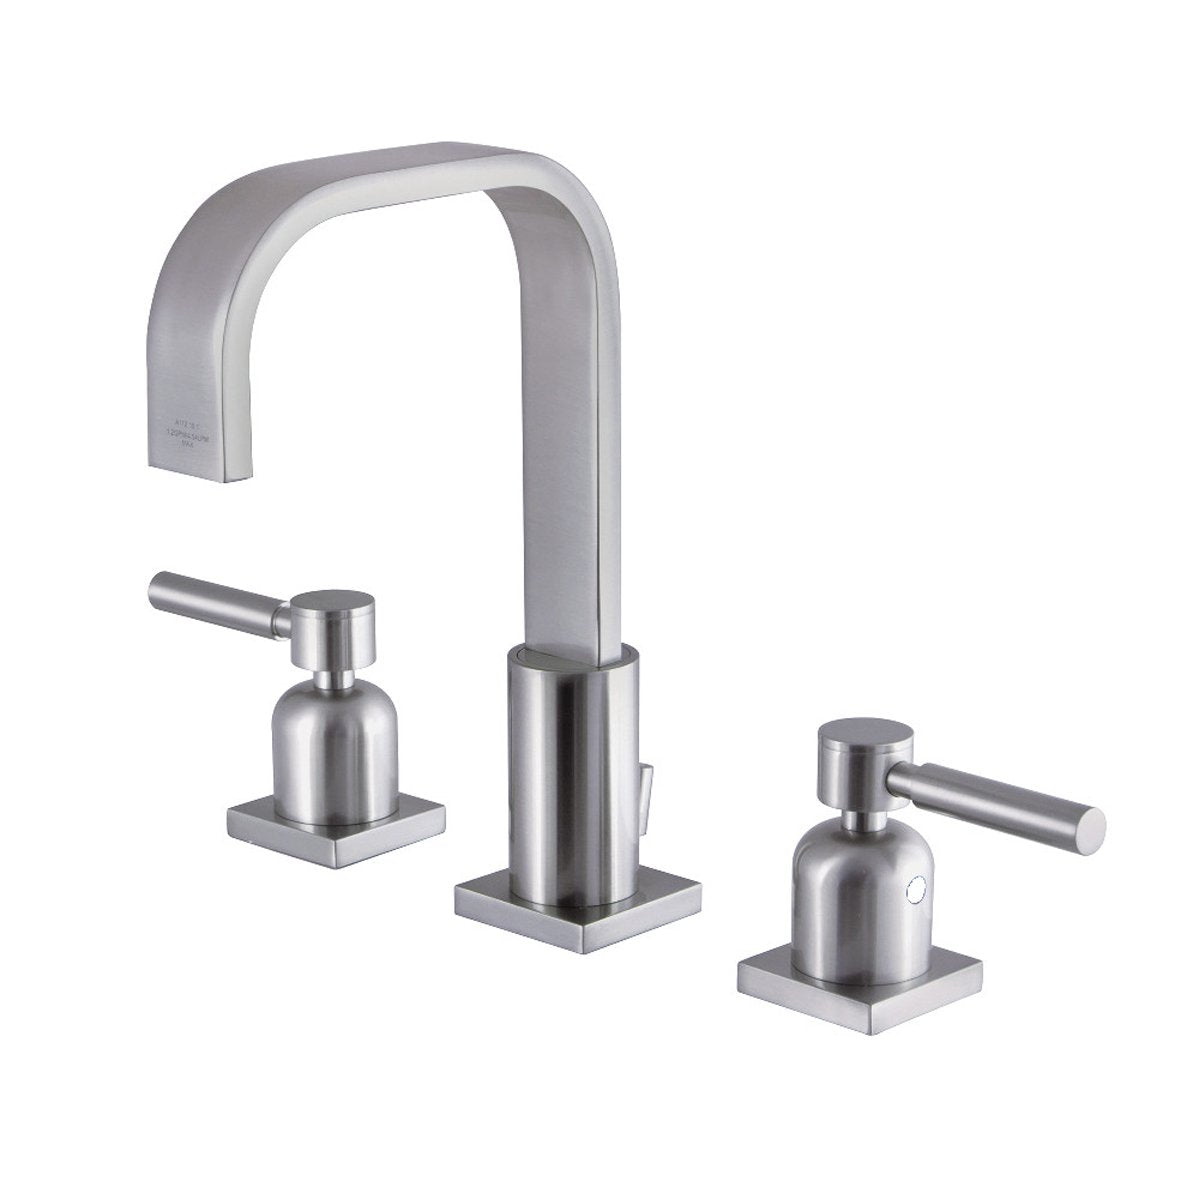 Kingston Brass Concord Fauceture 3-Hole 8-Inch Widespread Bathroom Faucet